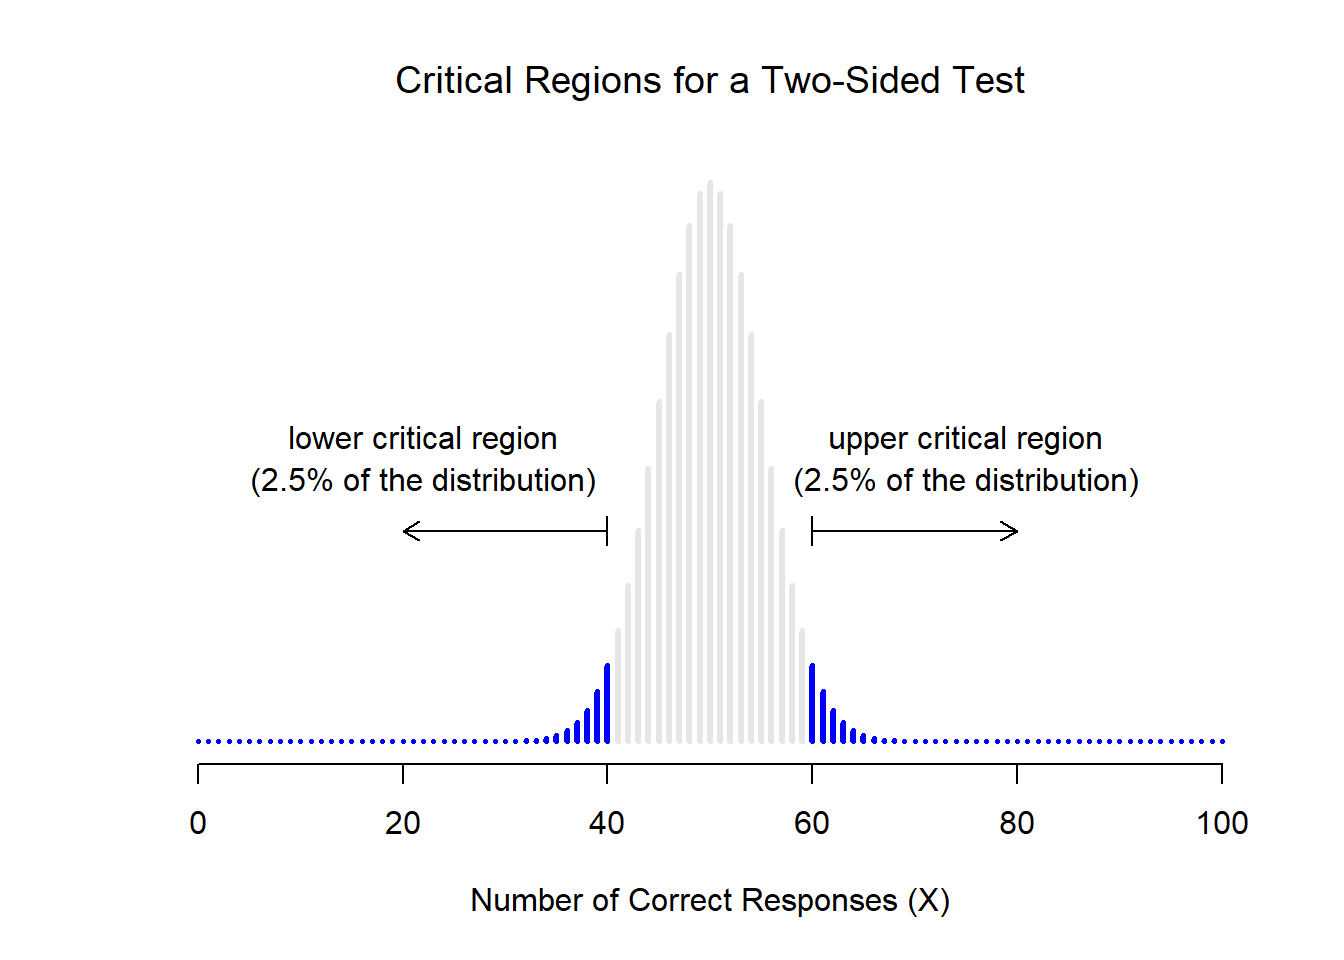 model hypothesis testing in r